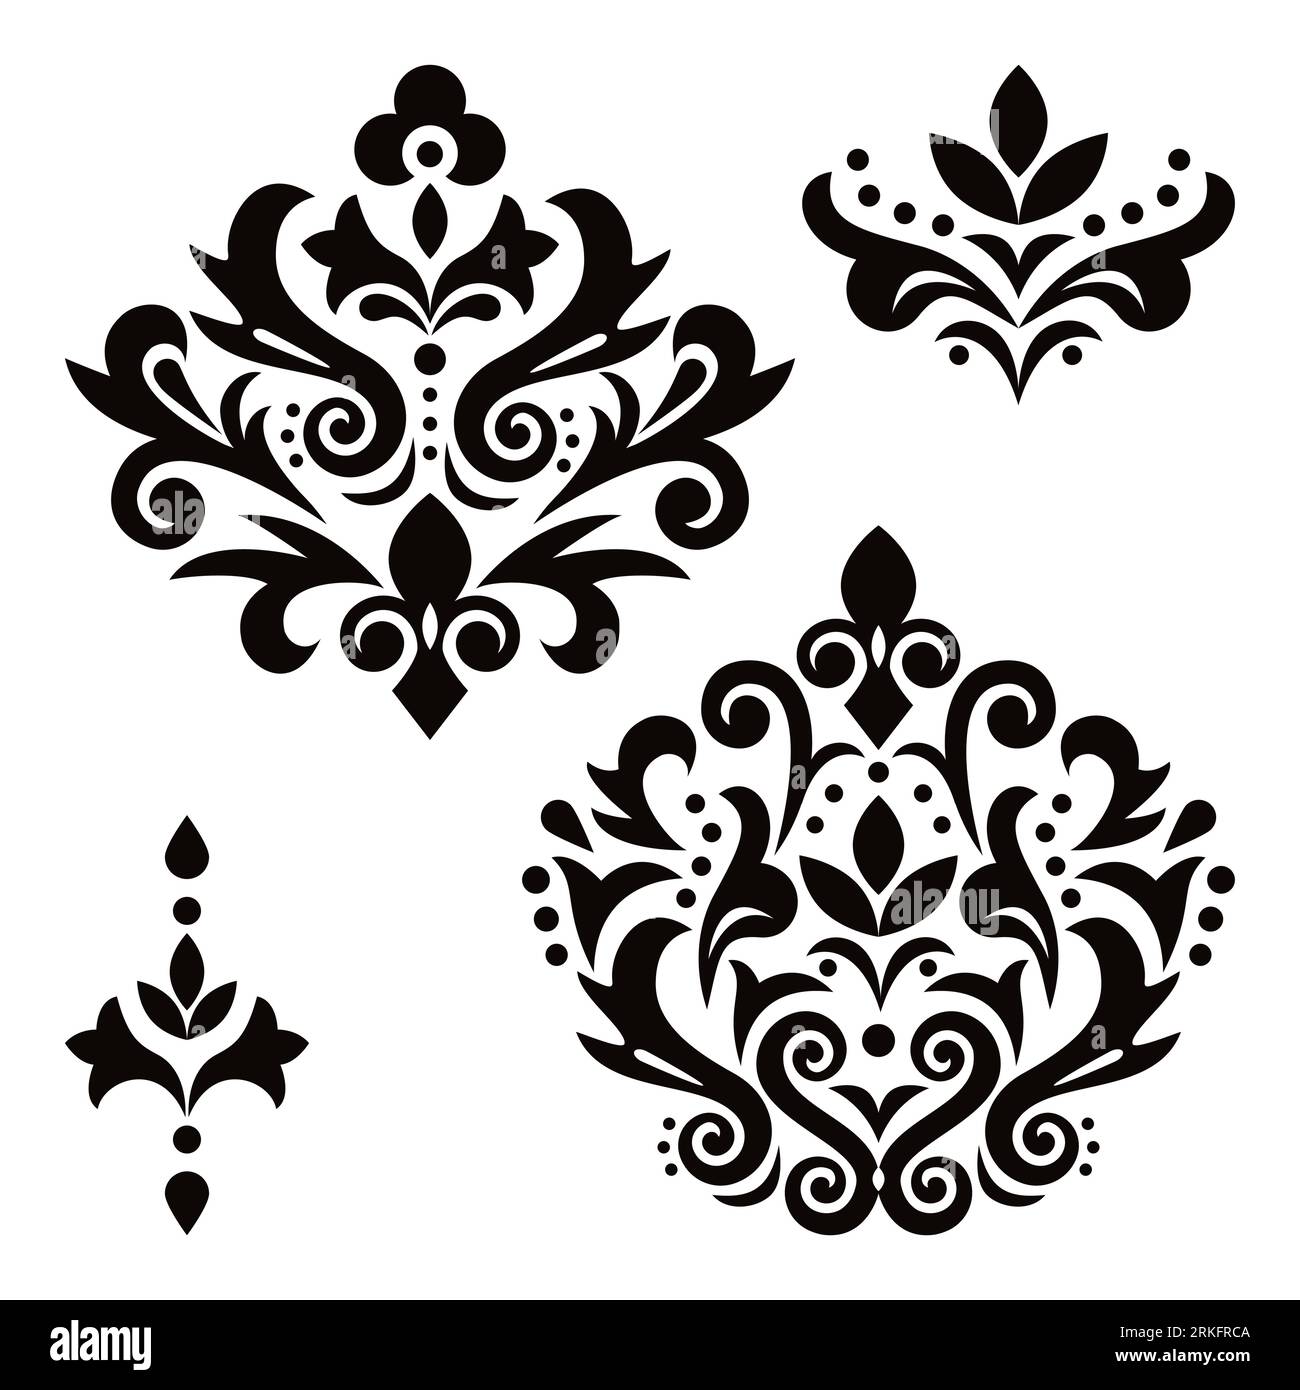 Baroque, Damask vector design elements with flowers, leaves and swirls - perfect for wallpaper and patterns Stock Vector